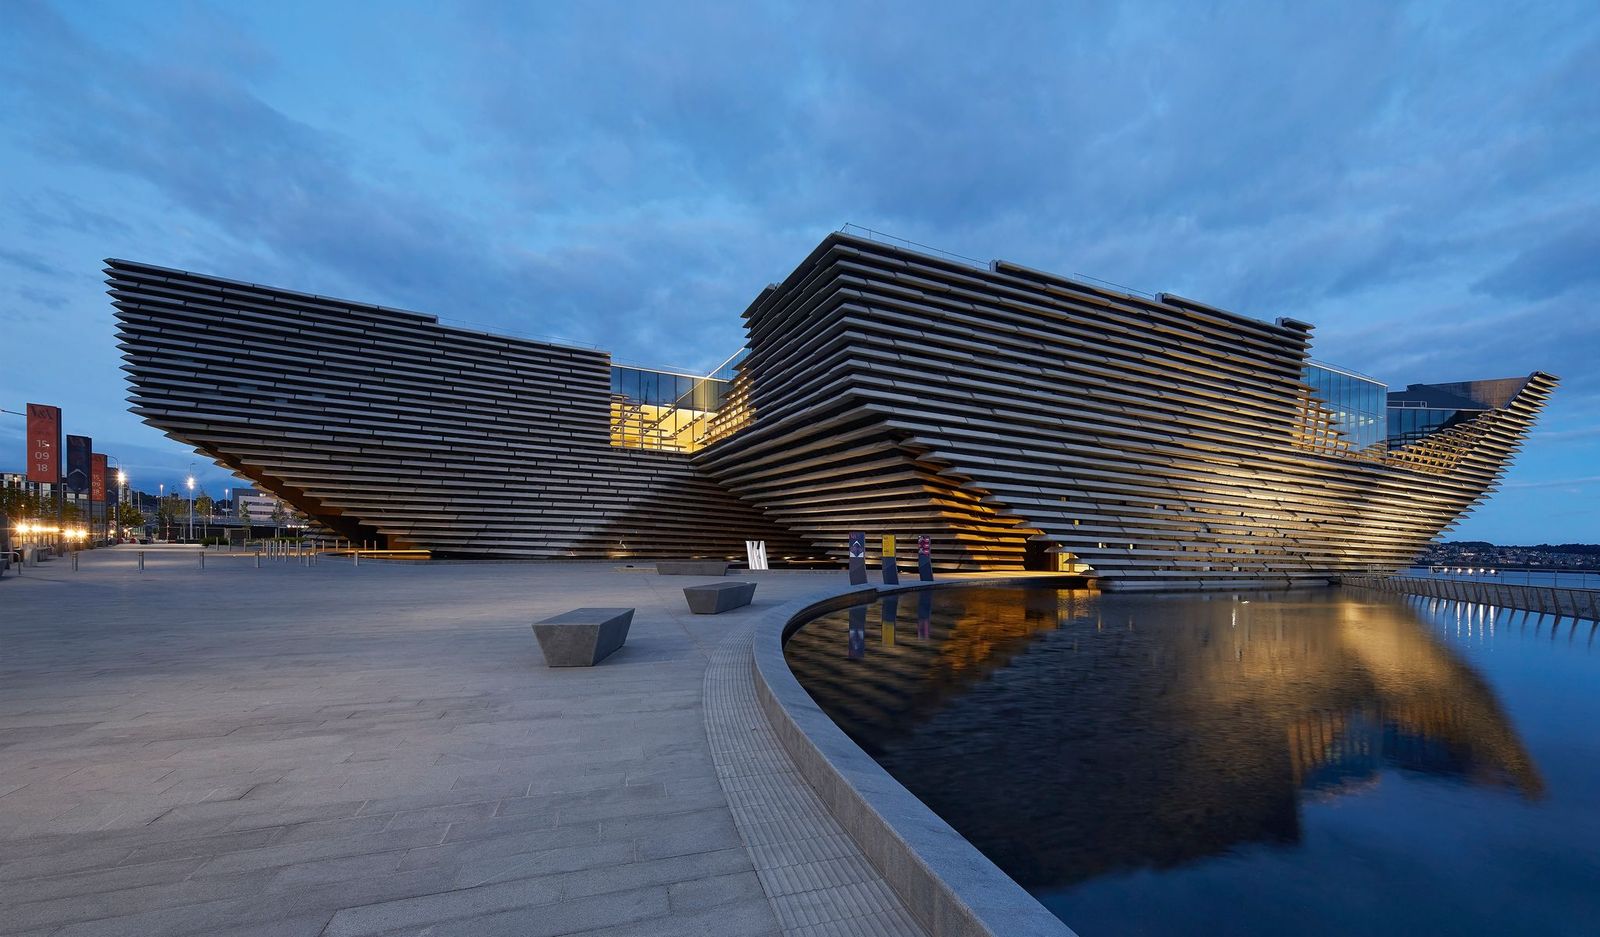 Welcome to the V&A Dundee!